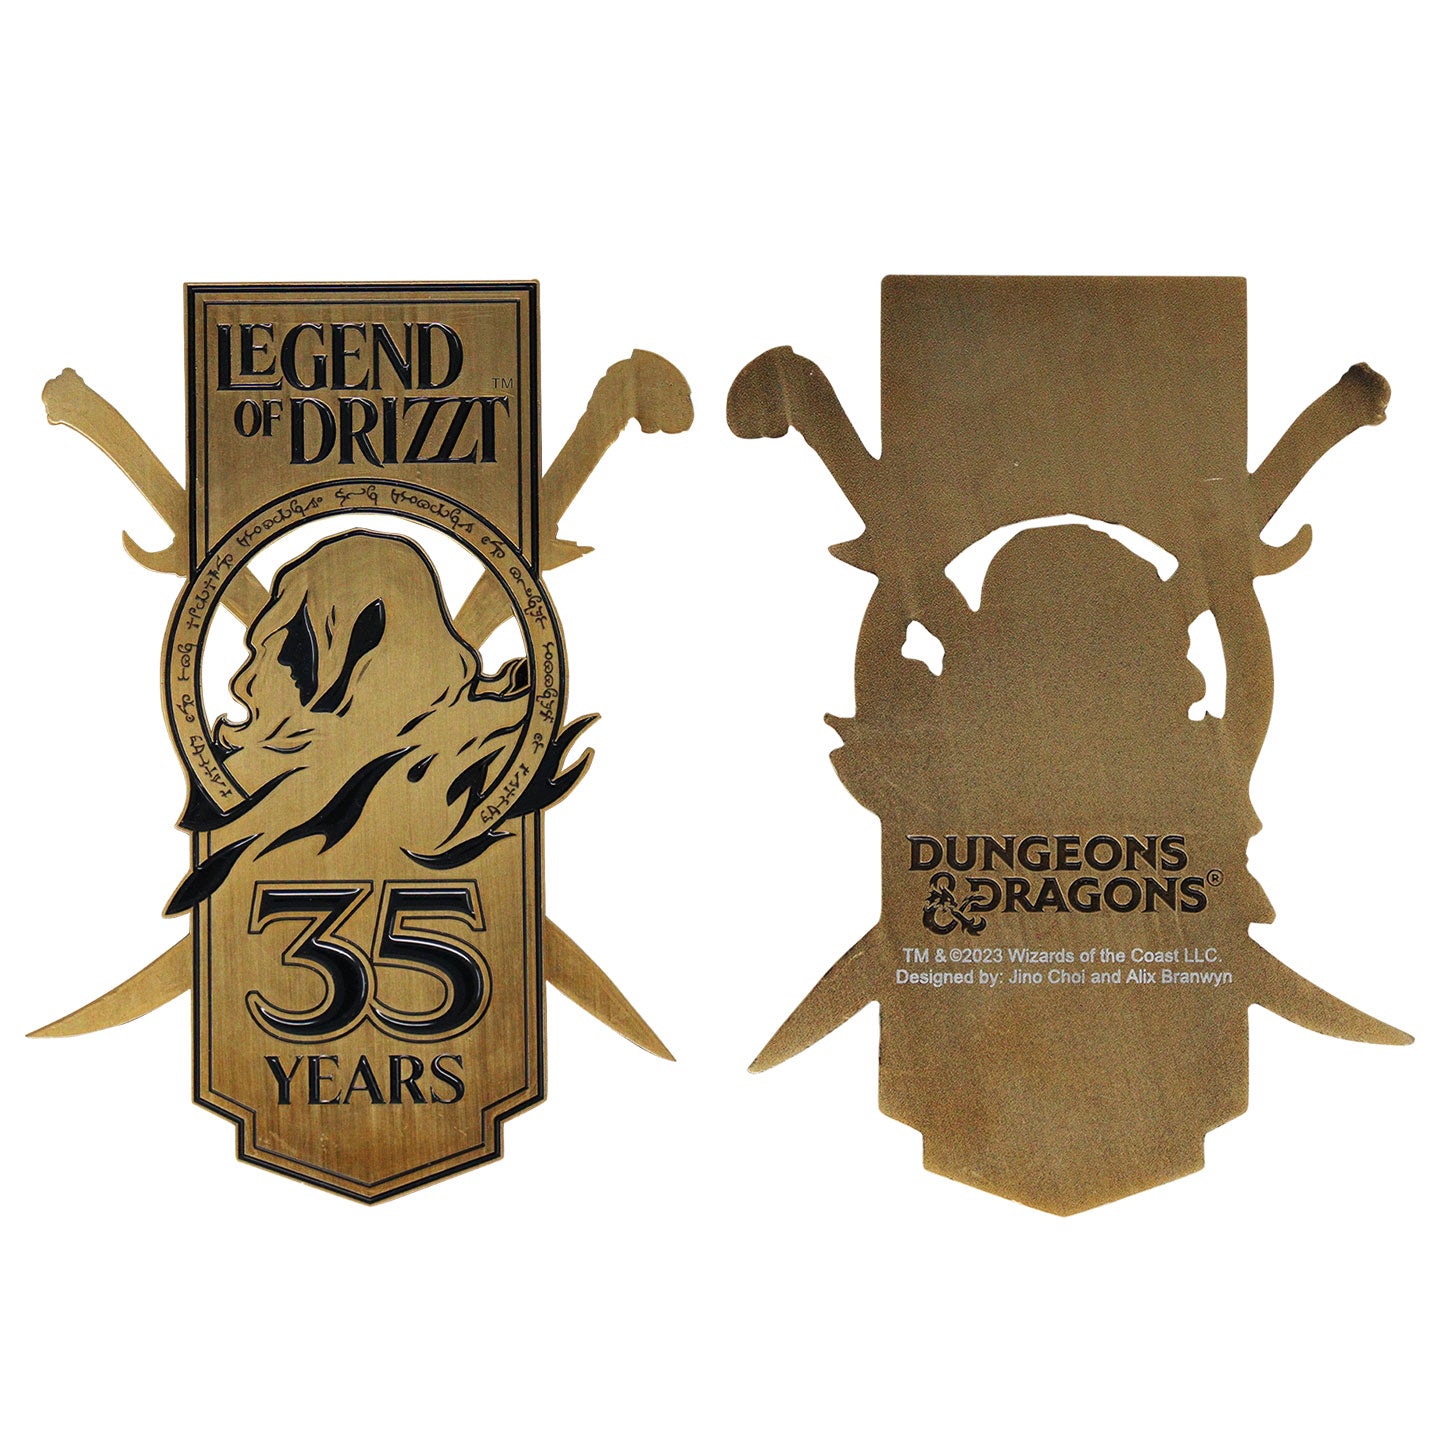 Dungeons & Dragons Limited Edition Legend of Drizzt 35th Anniversary Metal Collectible Ingot